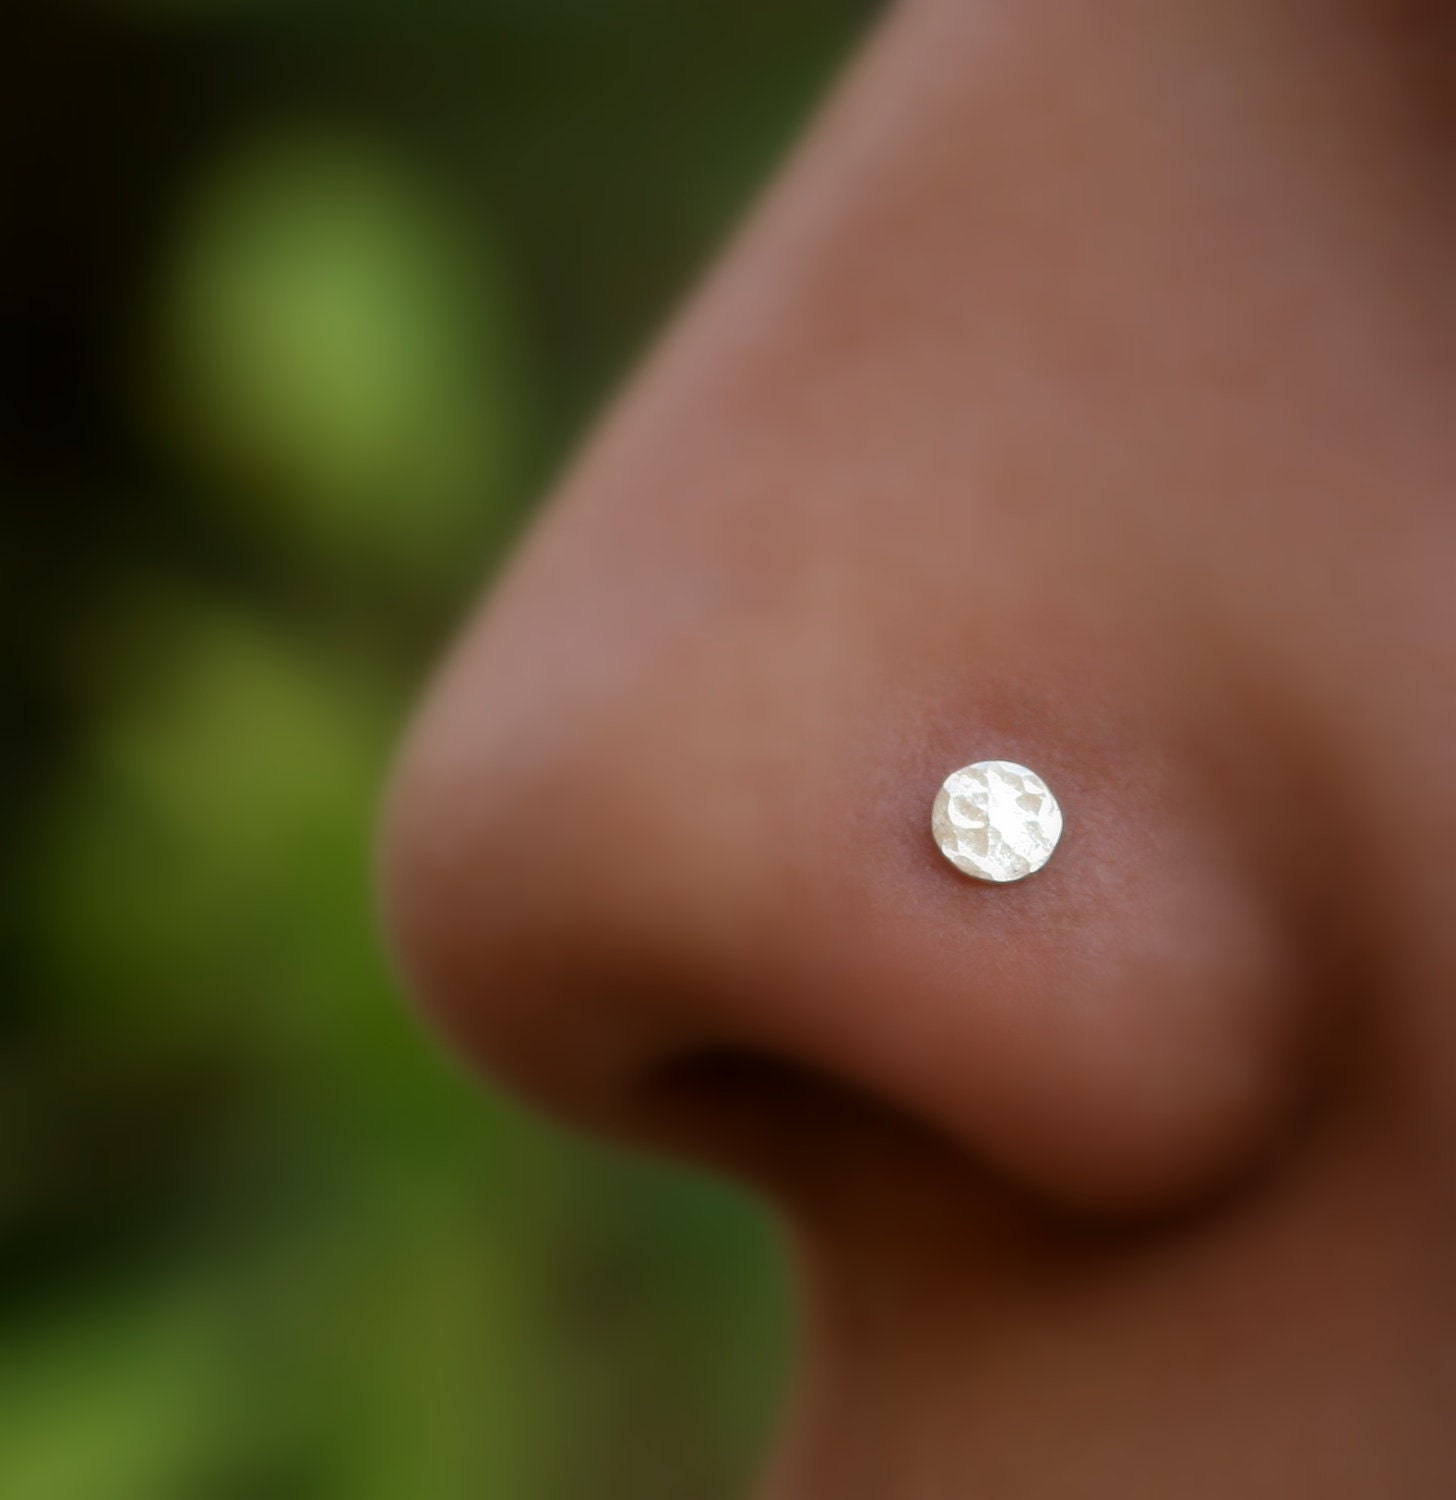 Nose Ring Stud Nose Piercing Tragus Earring Cartilage with Amazing nose piercing earrings Best Photo Reference